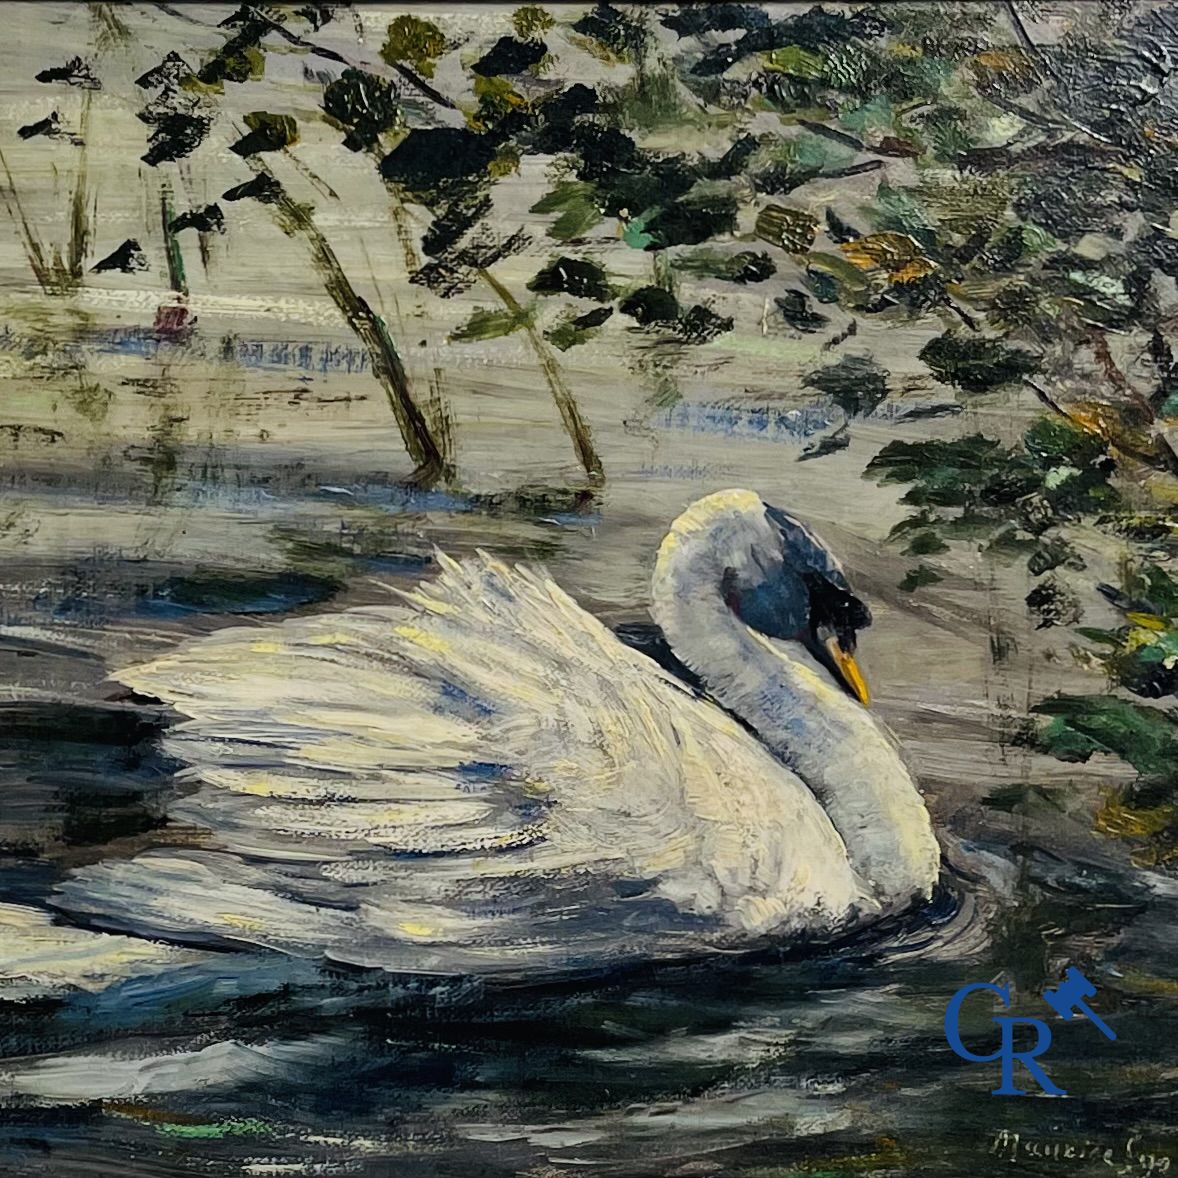 Painting: Maurice Sijs (*) (1880-1972). The white swan. Oil on panel.